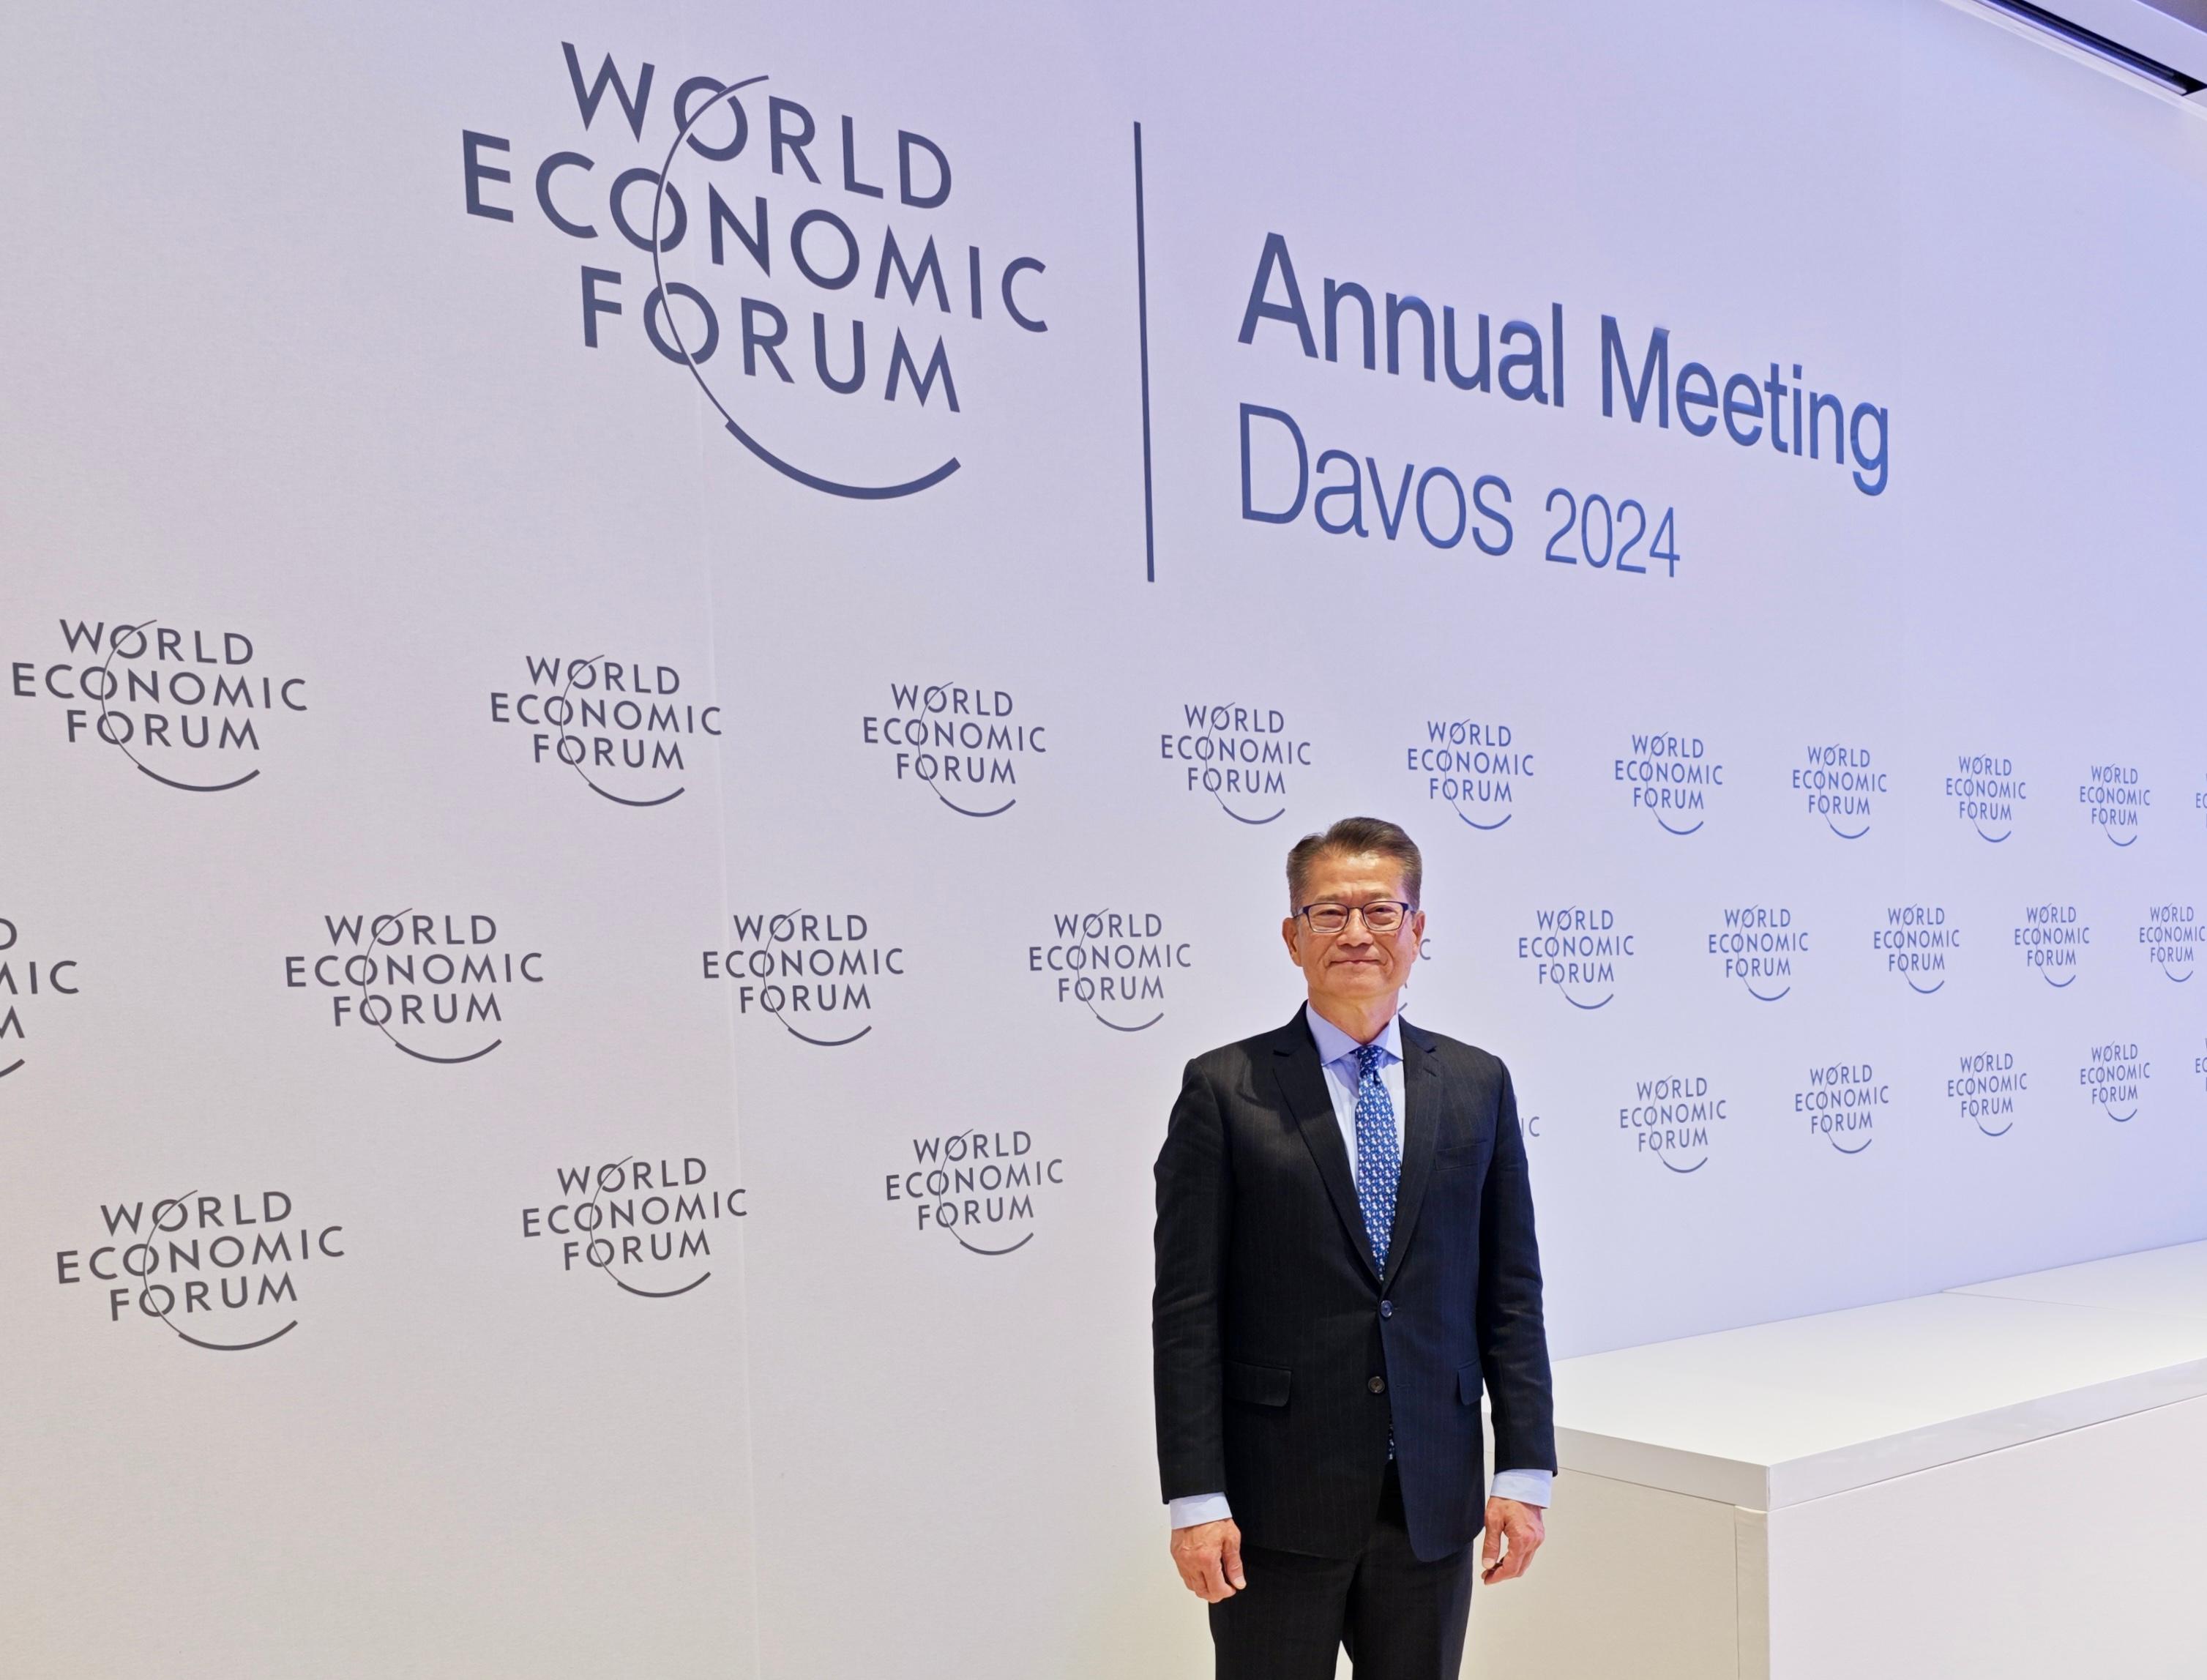 The Financial Secretary, Mr Paul Chan arrived in Davos, Switzerland yesterday (January 15, Davos time) to attend the World Economic Forum Annual Meeting 2024.